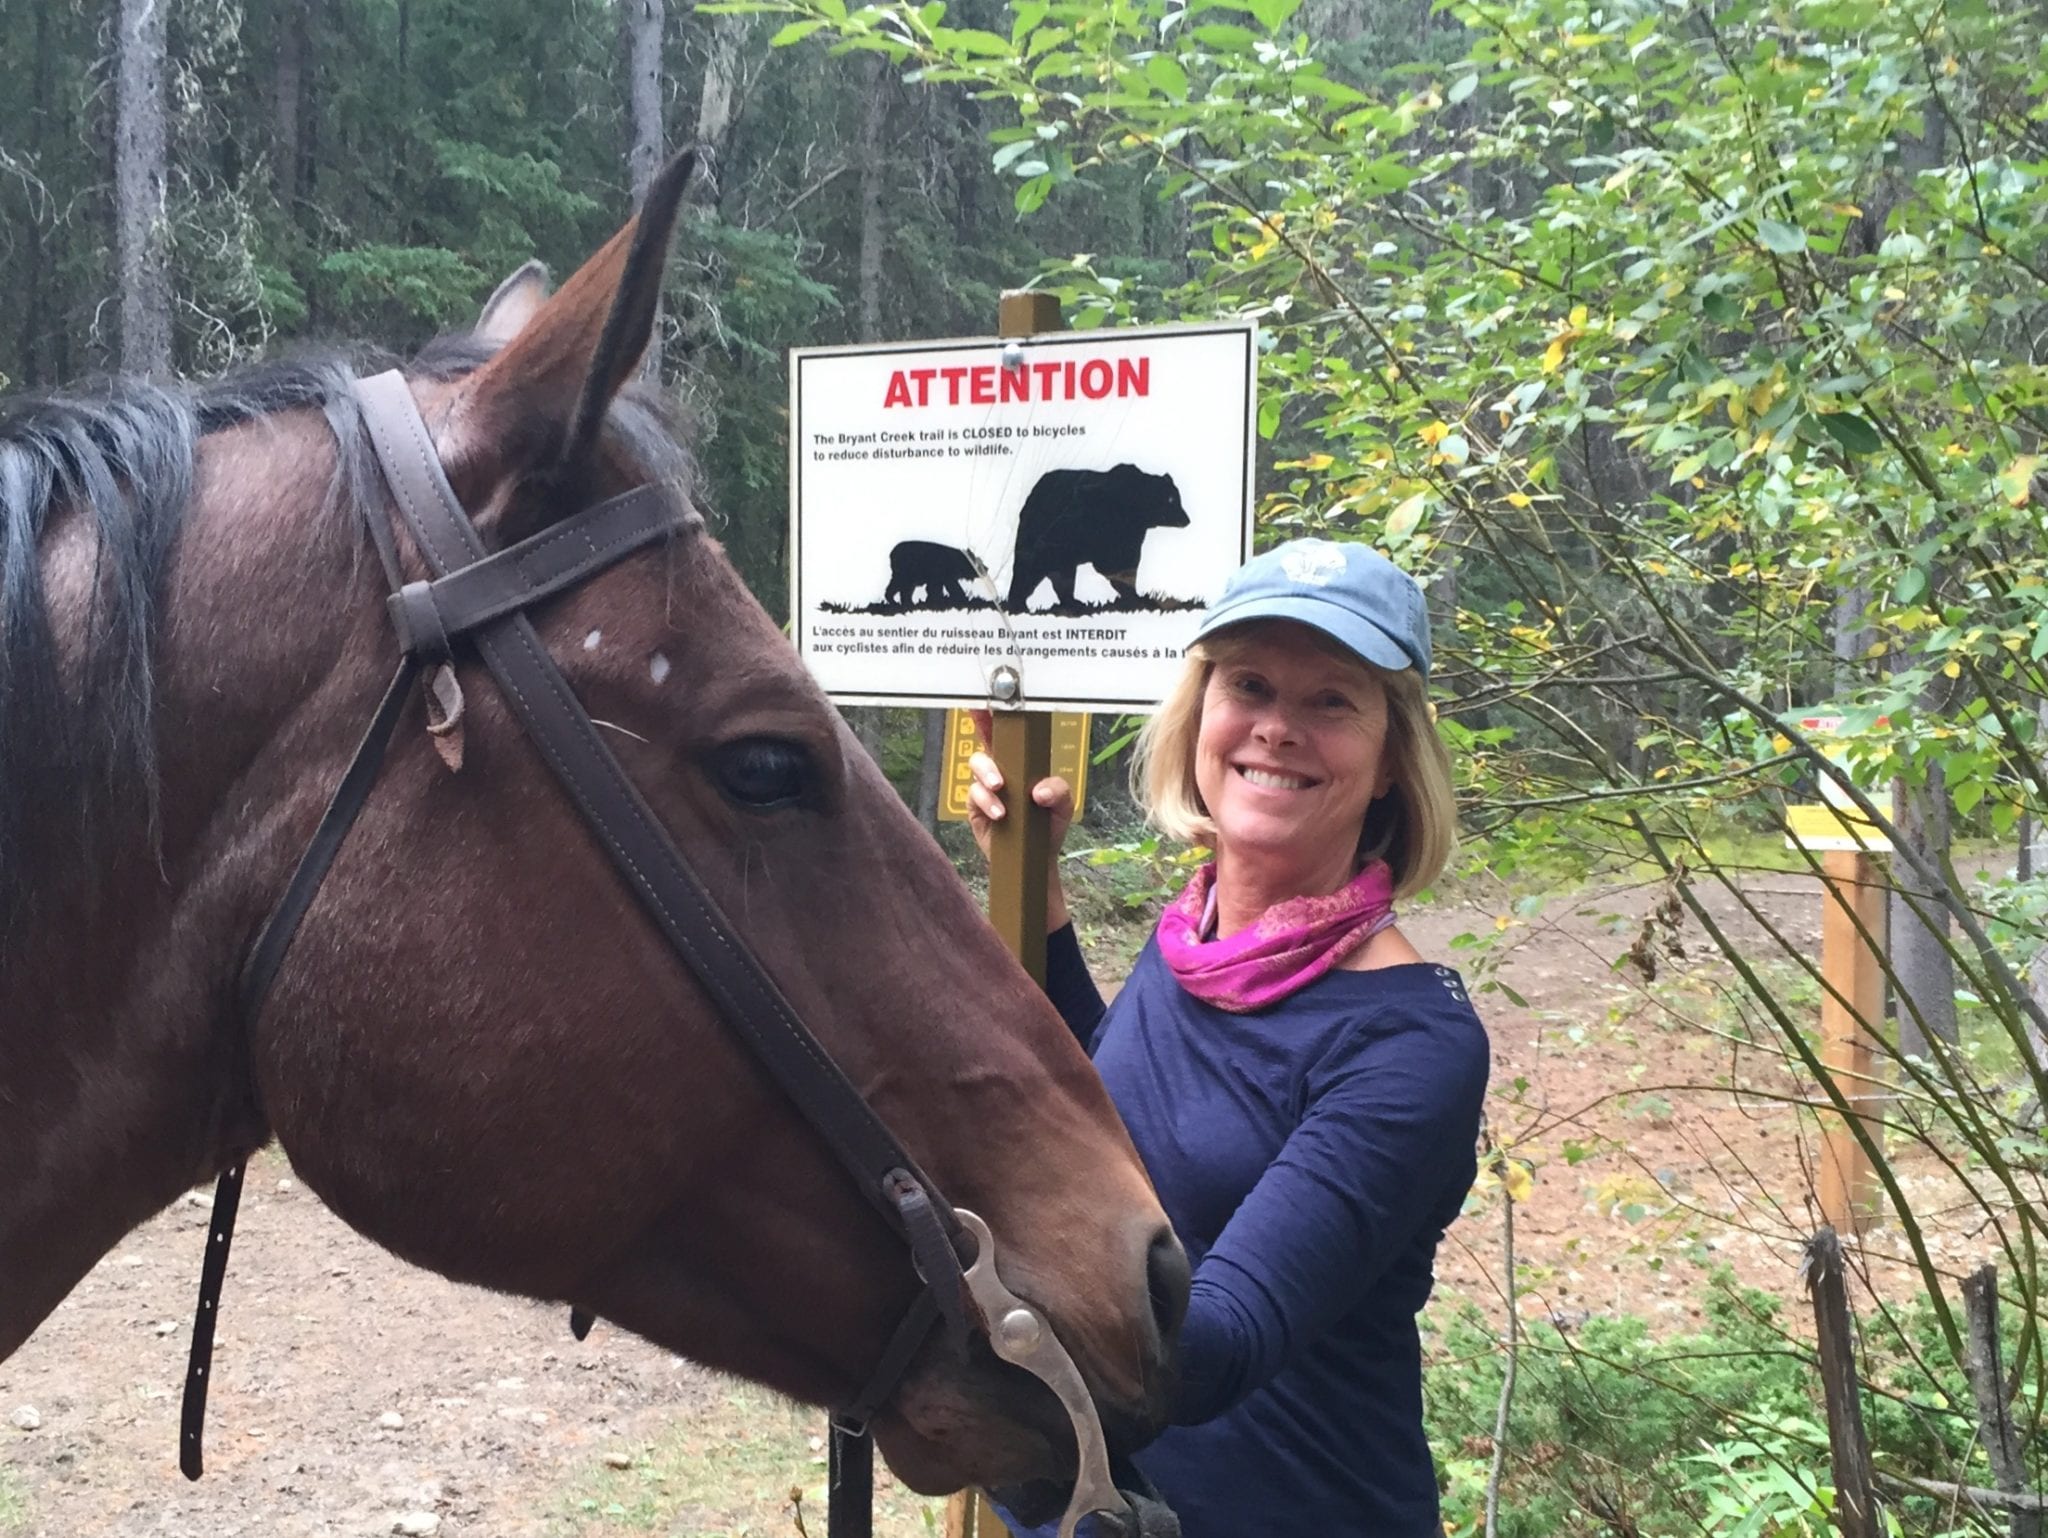 Saddle up! But watch for bears on the trail! 